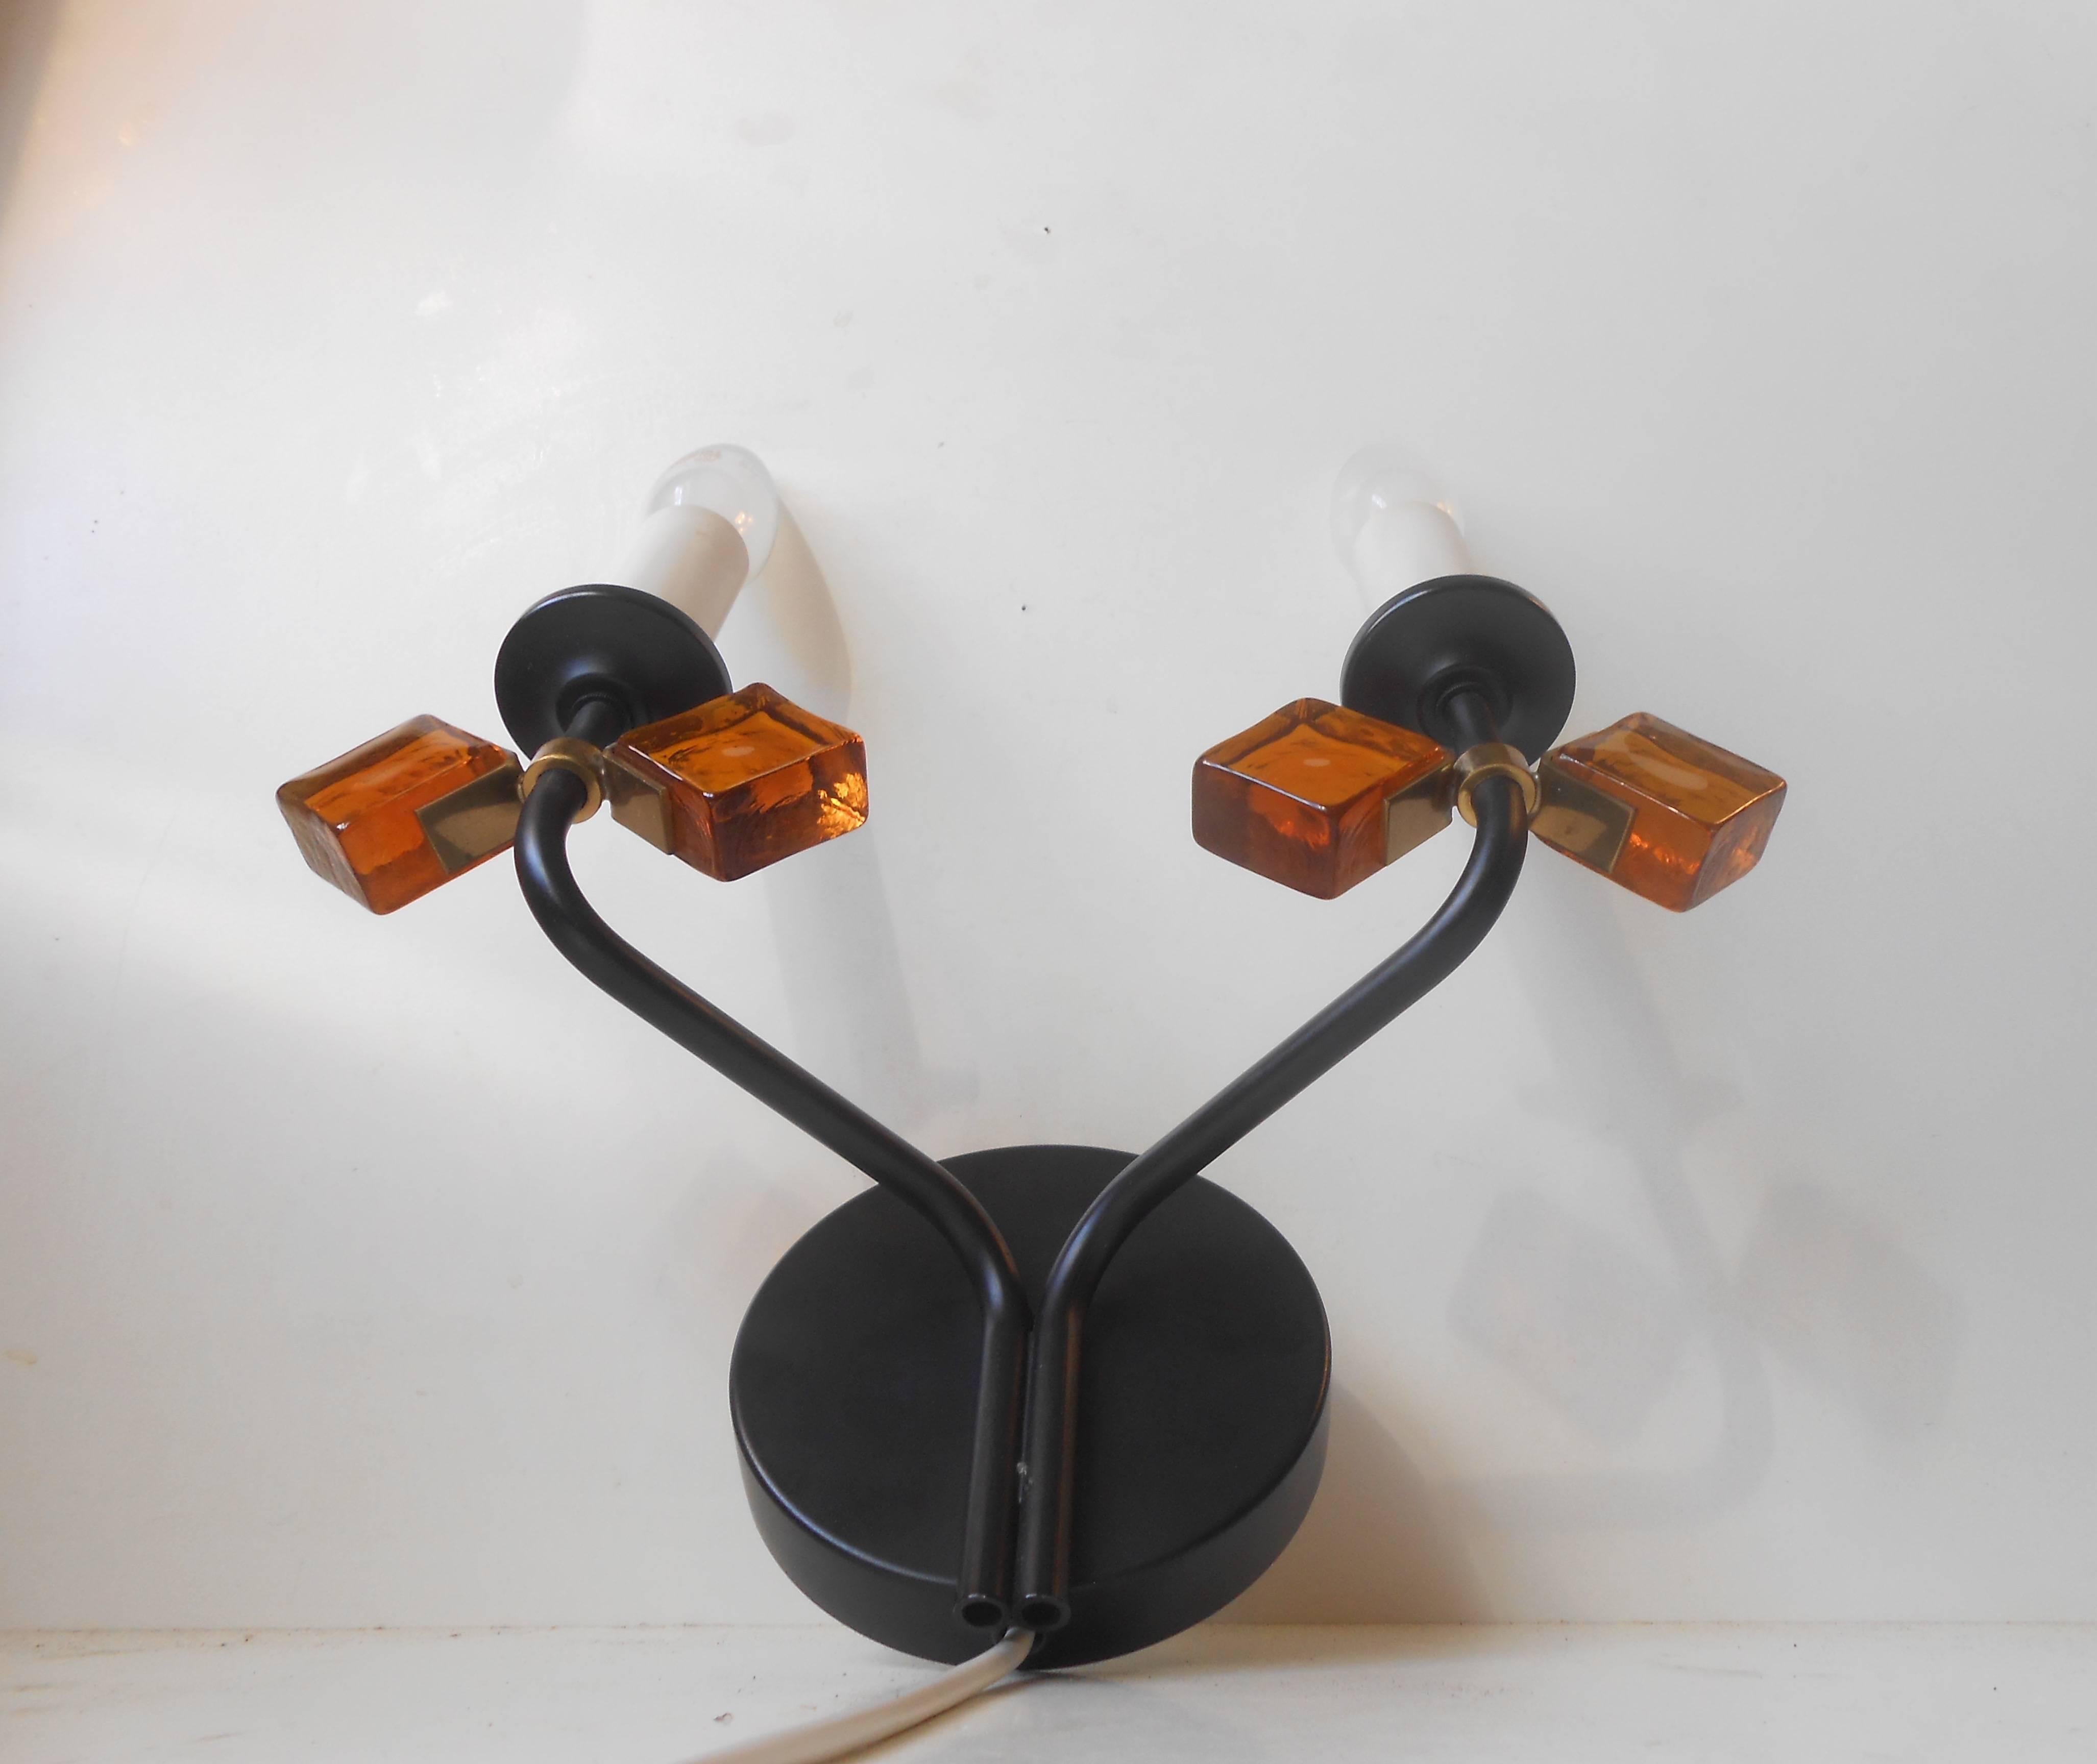 Black-bodied sconce by Holm Sørensen with rotating brass and amber glass butterfly-shaped settings. Original sticker to the backside. Measurements (approximate): H 12 inches, W 10 inches.